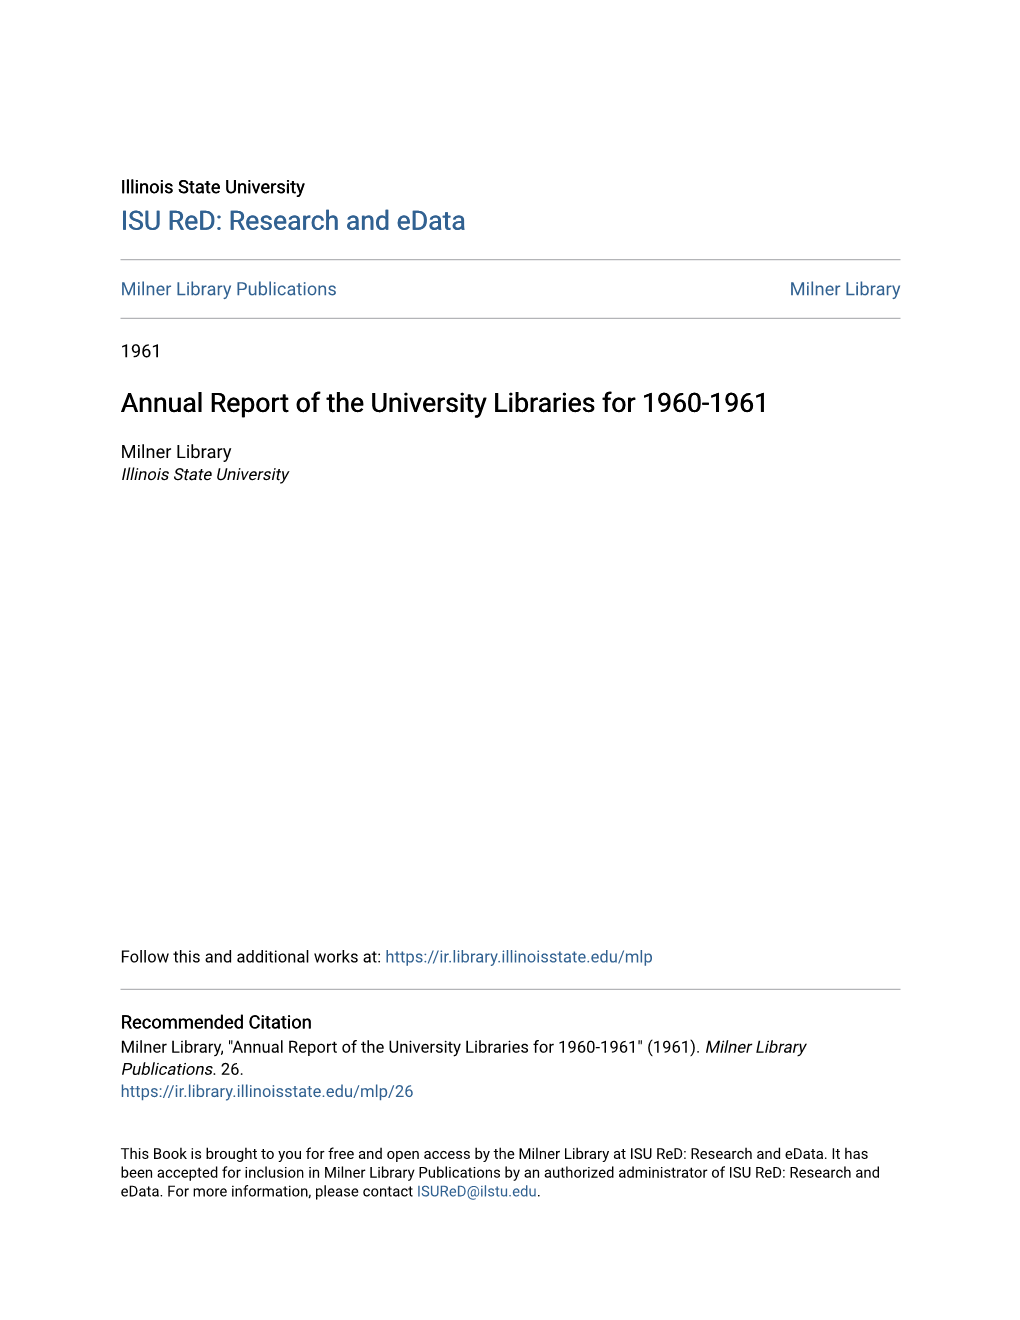 Annual Report of the University Libraries for 1960-1961